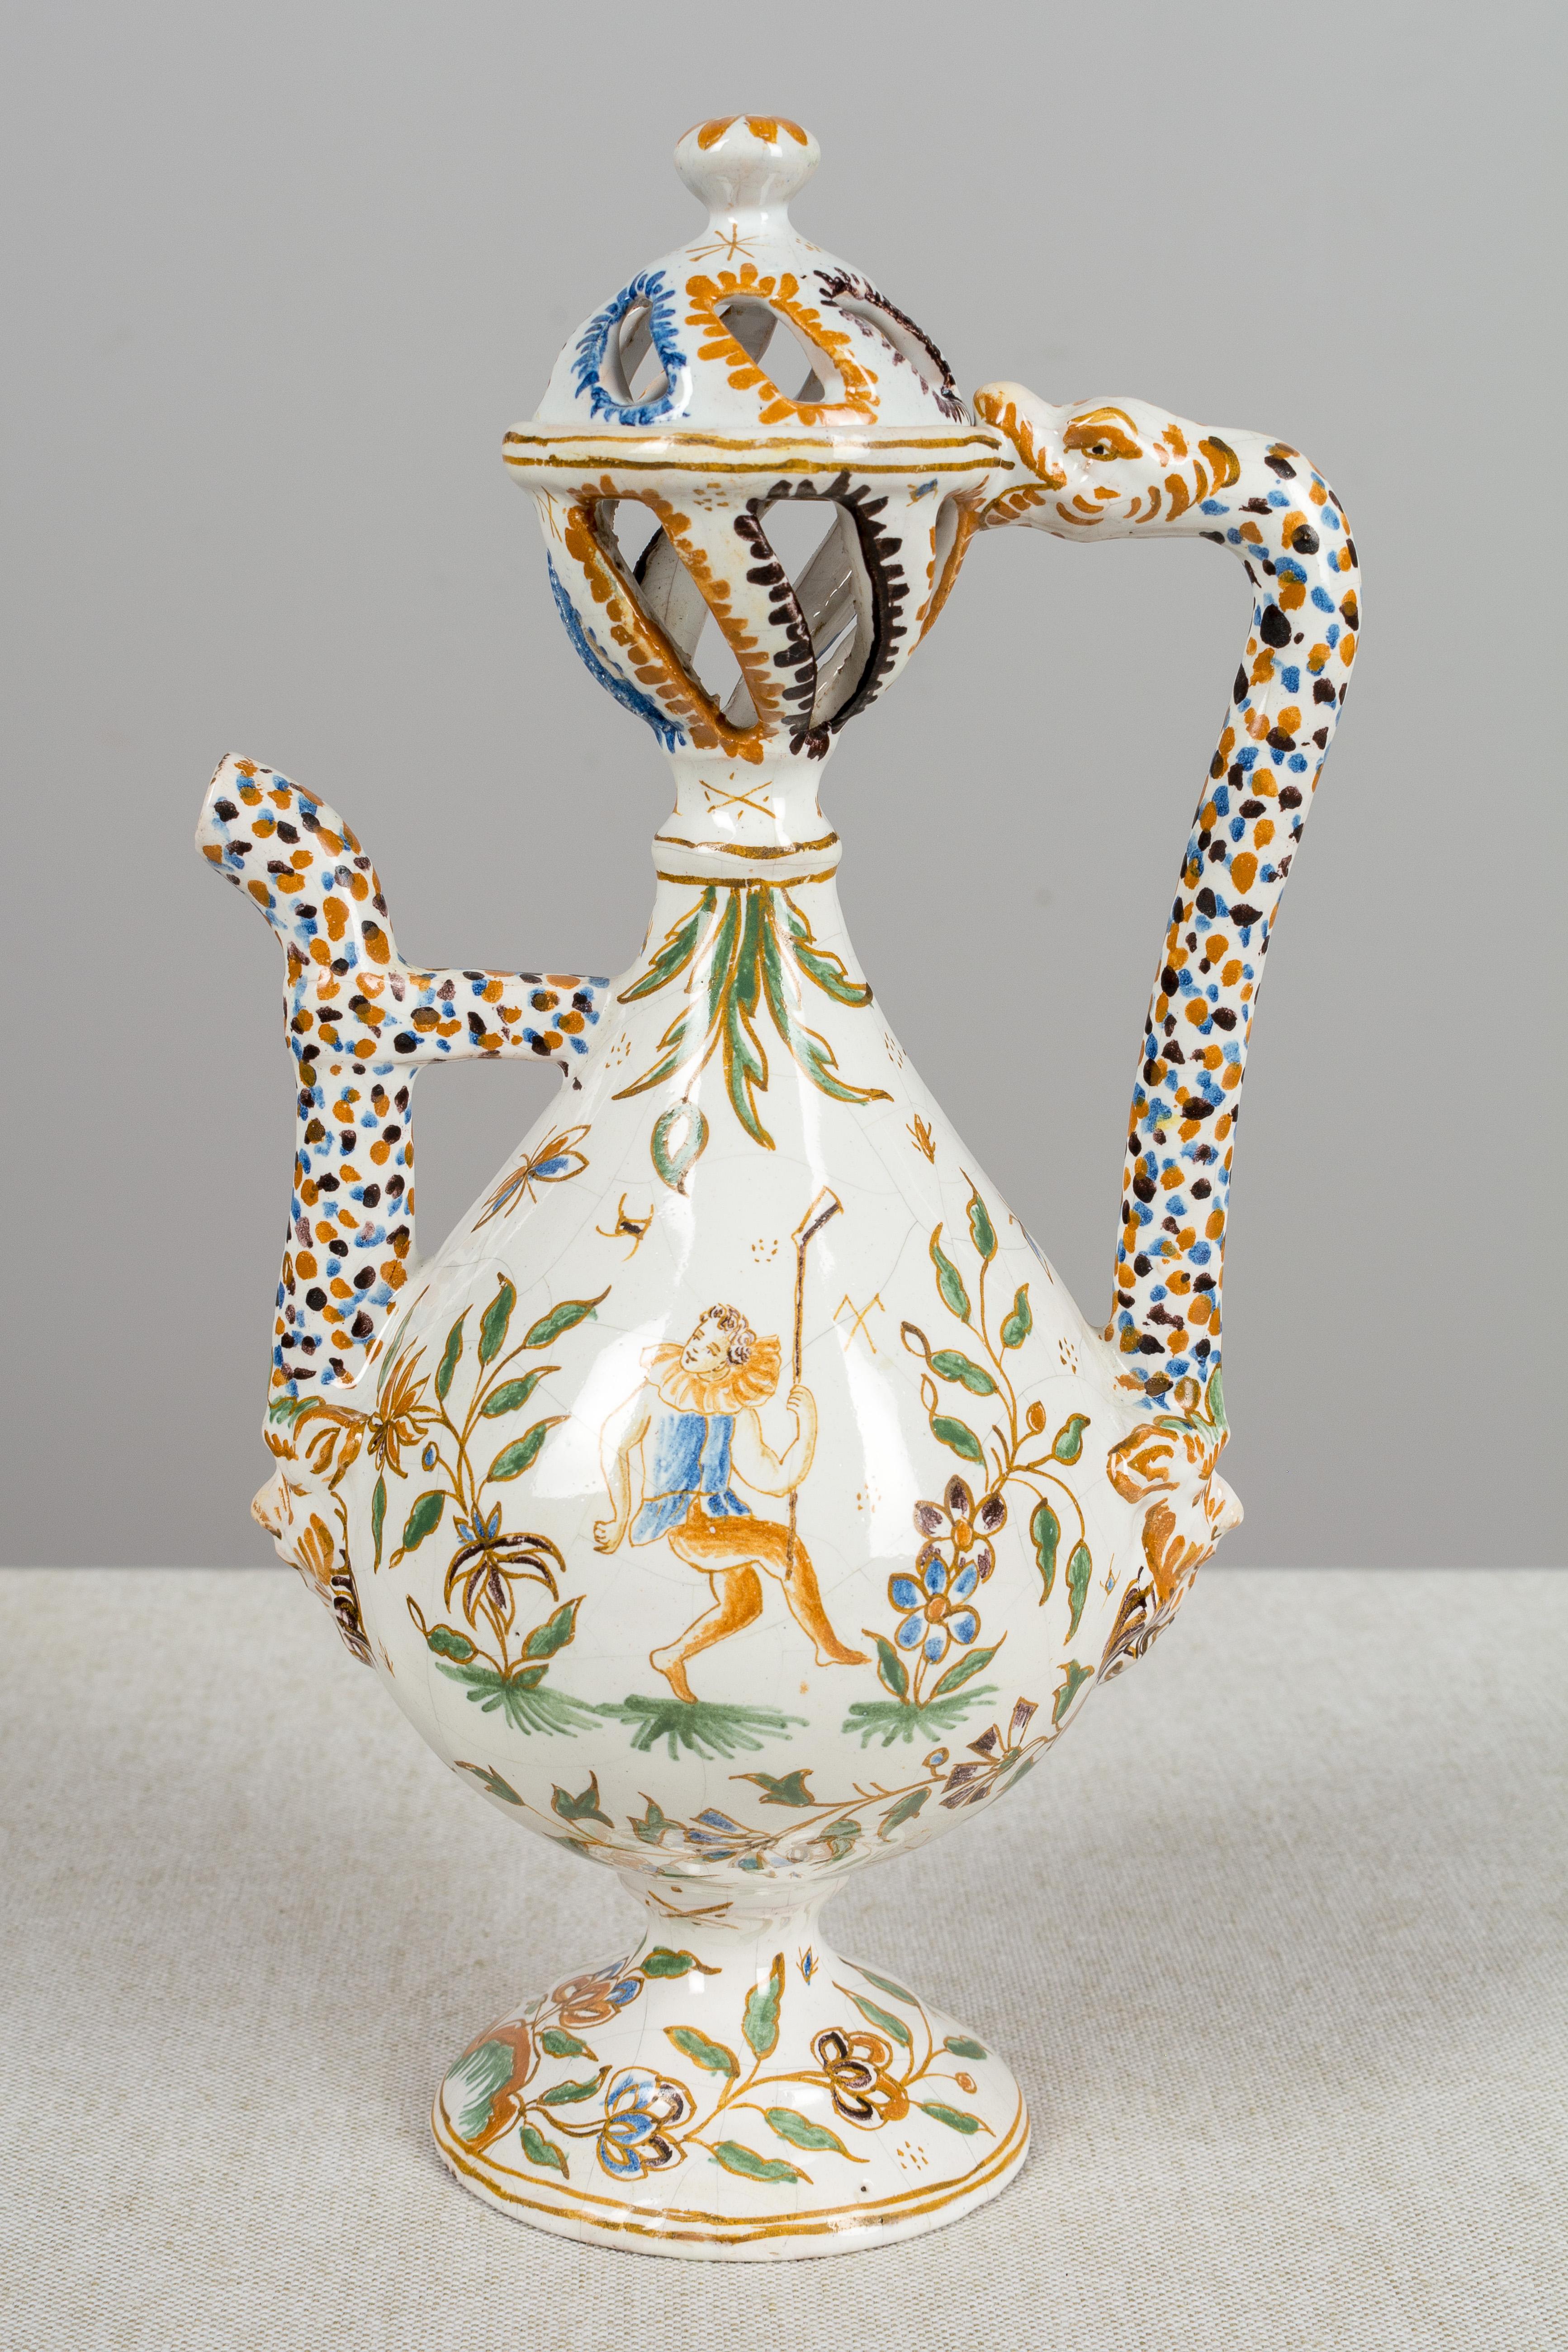 A small 18th century French Moustiers faience ewer with an unusual pierced dome lid. Delicate hand painted figural and floral decoration in the traditional colors of mustard yellow, green and blue. From the workshop of Joseph Olérys with mark on the